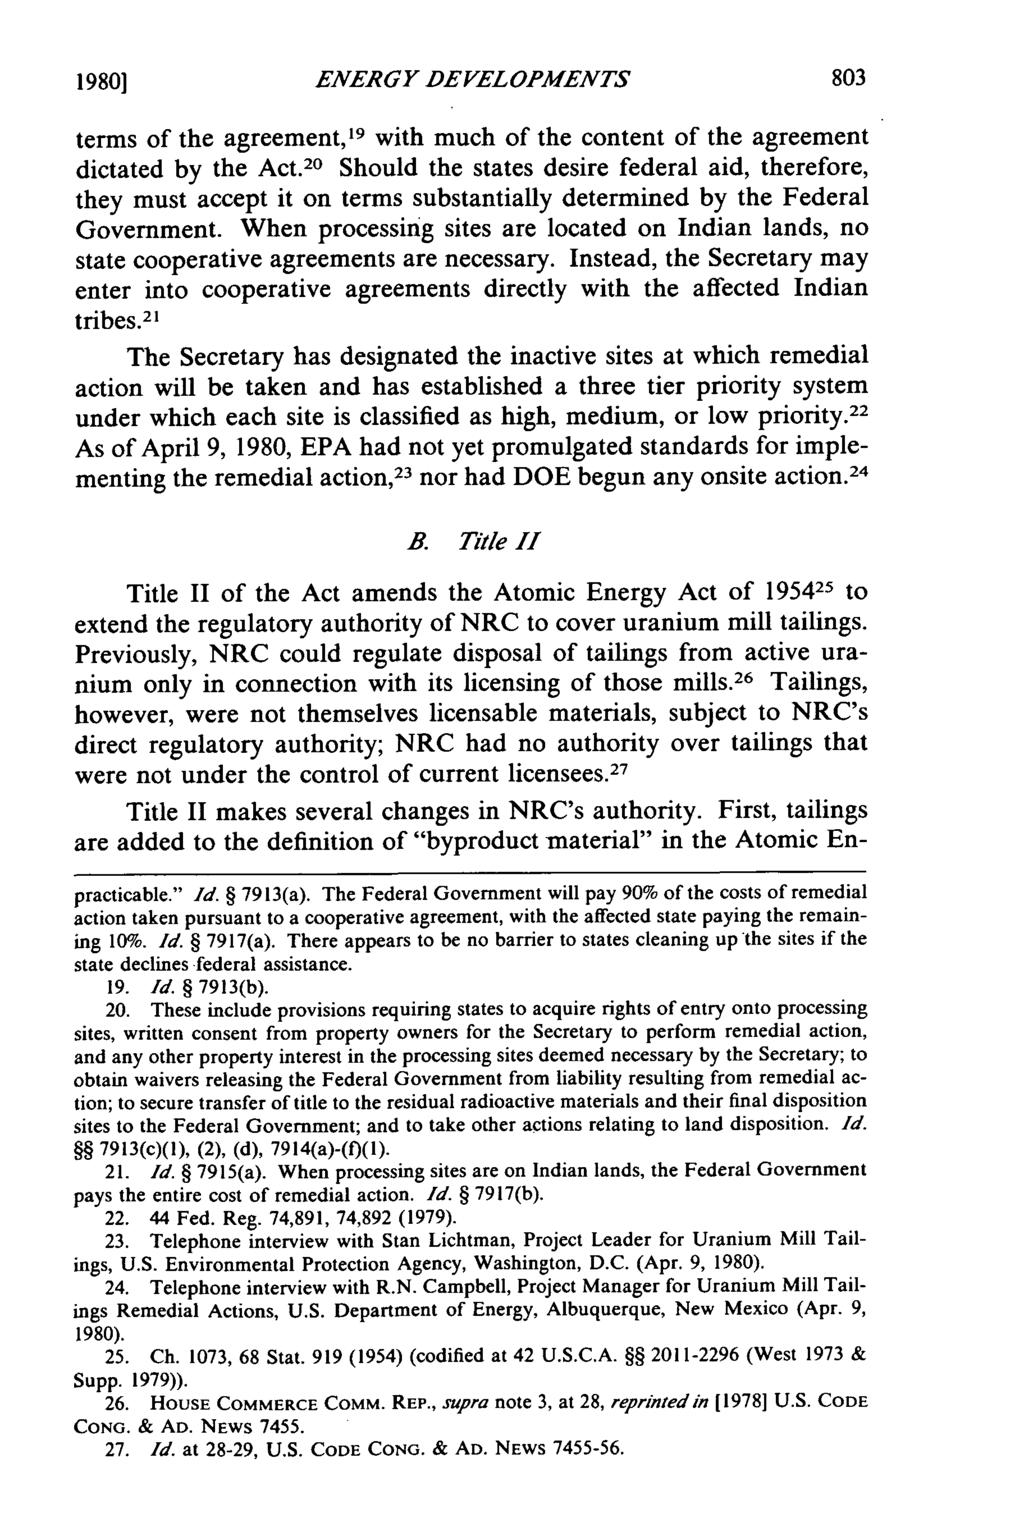 19801 ENER G Y DE VEL OPMENTS terms of the agreement, 19 with much of the content of the agreement dictated by the Act.